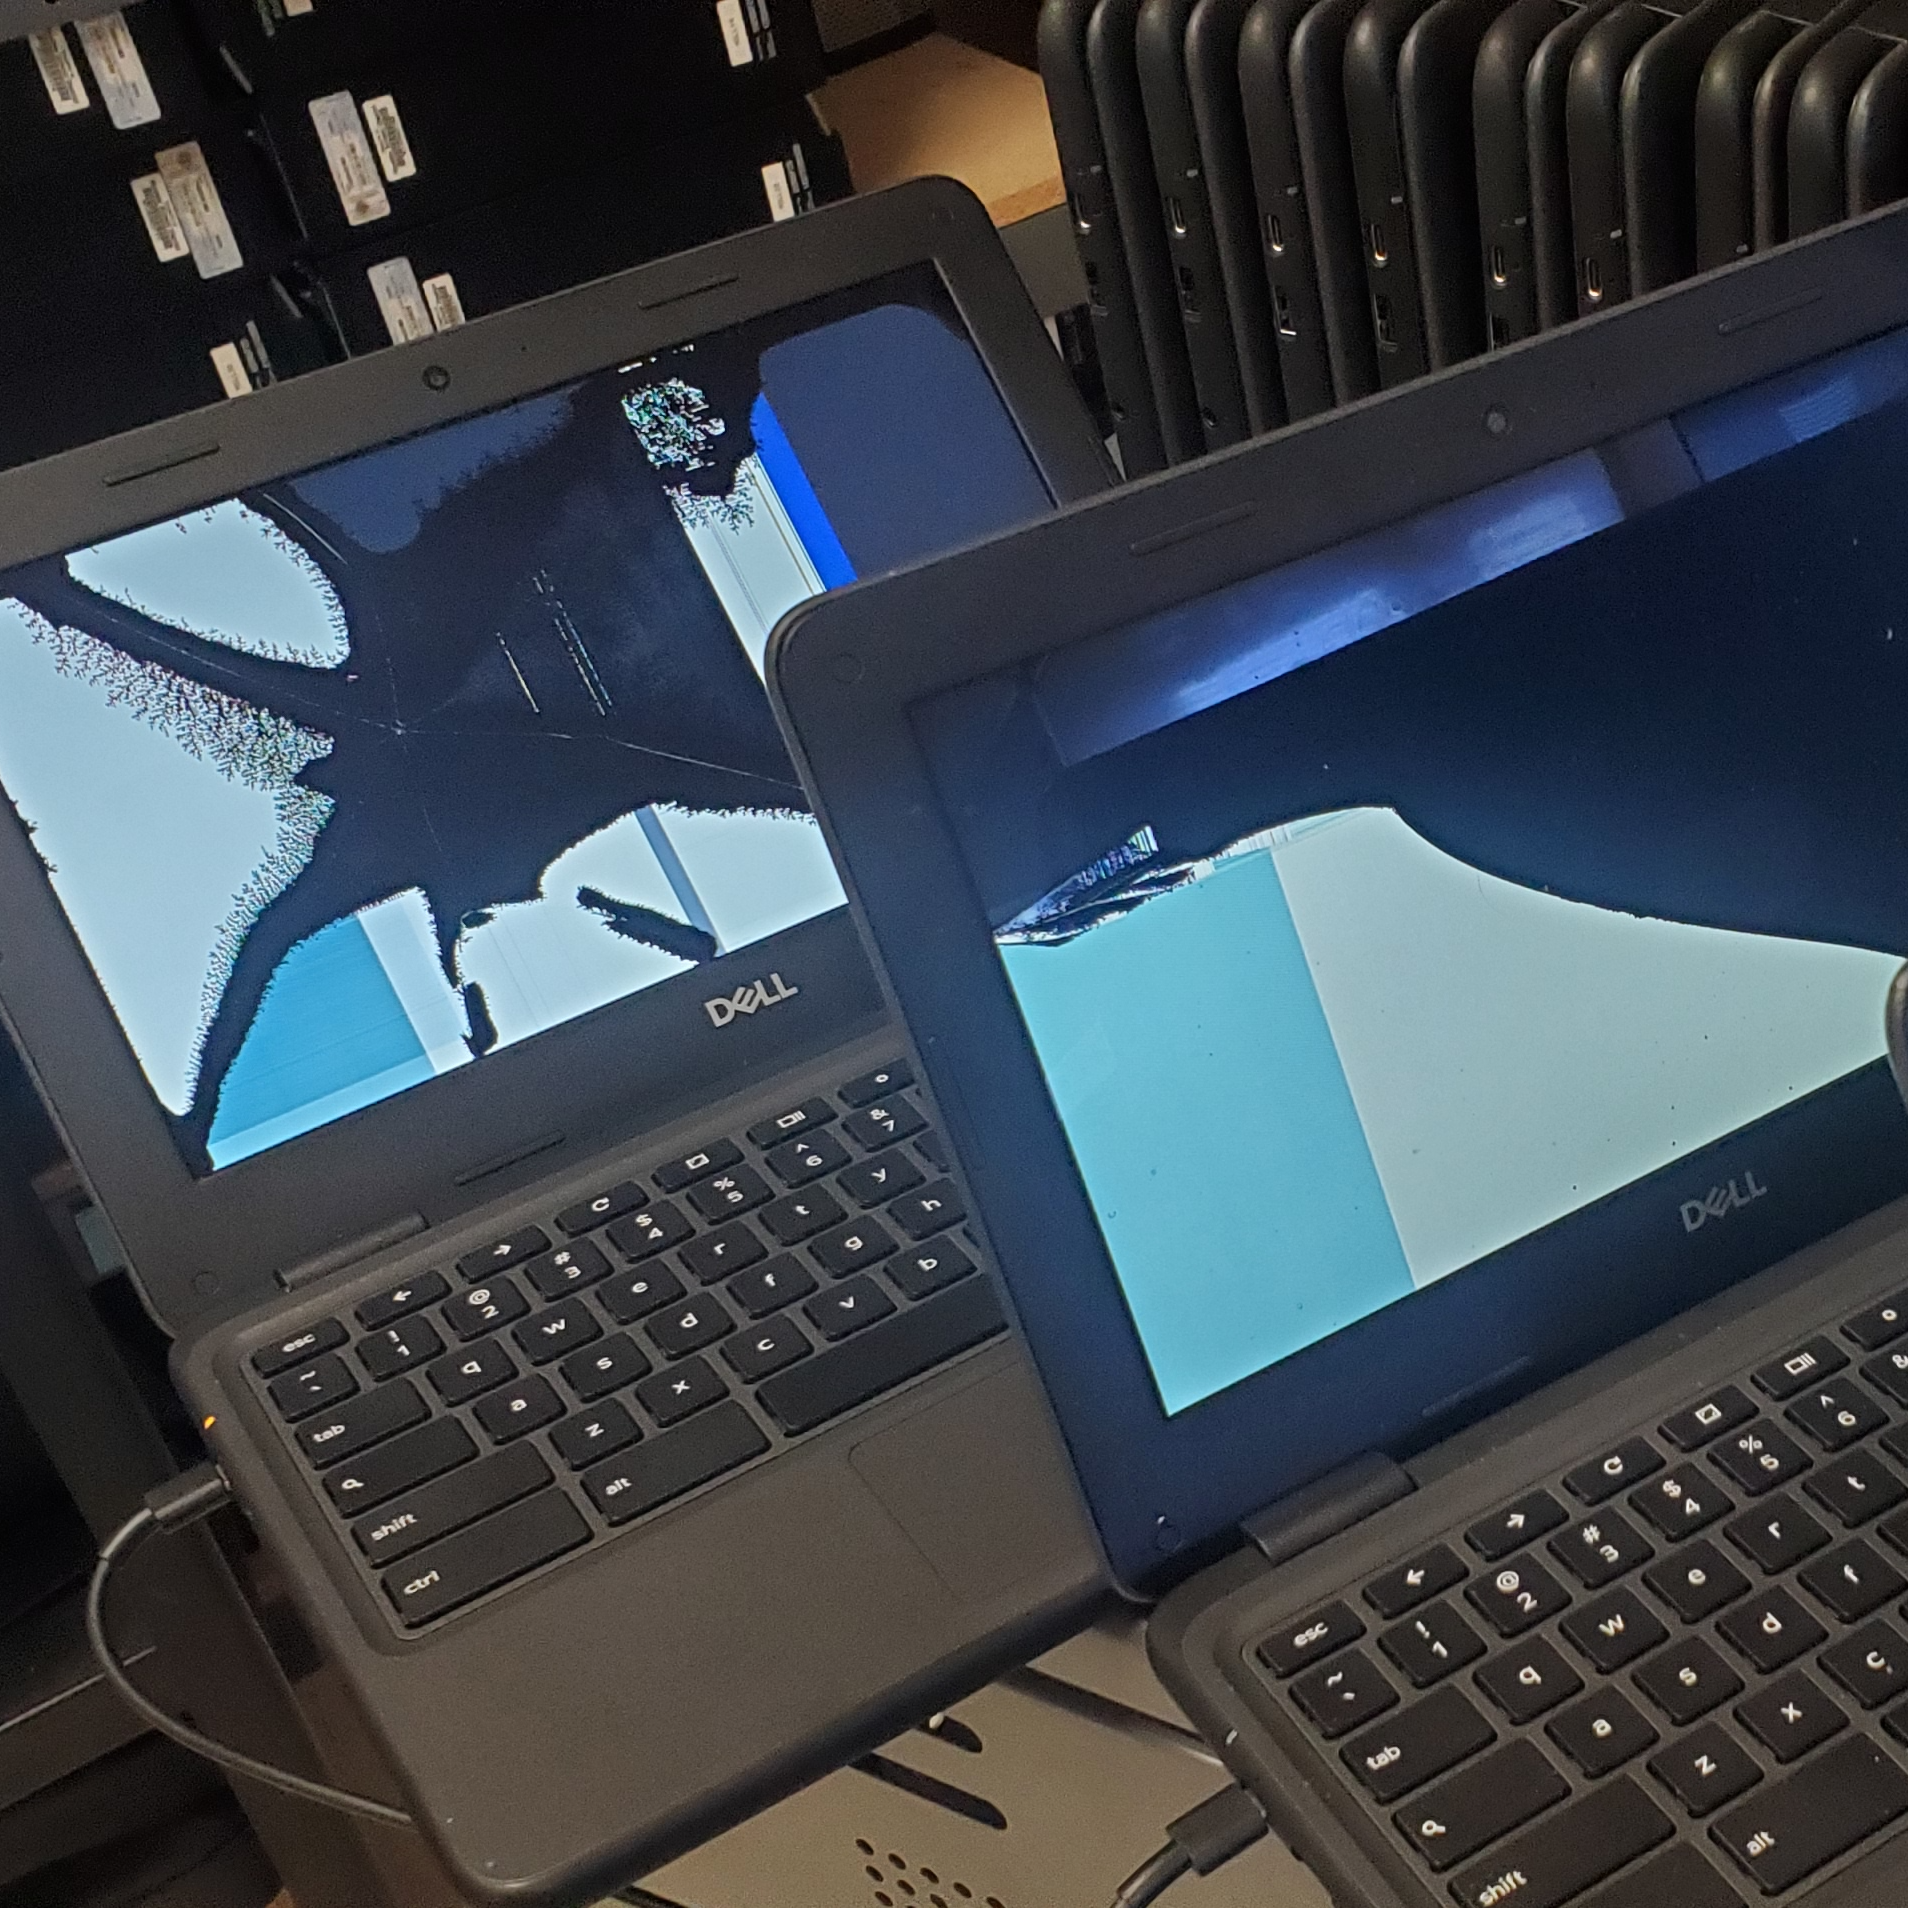 2 Dell laptops turned on with some laptops surrounding them.